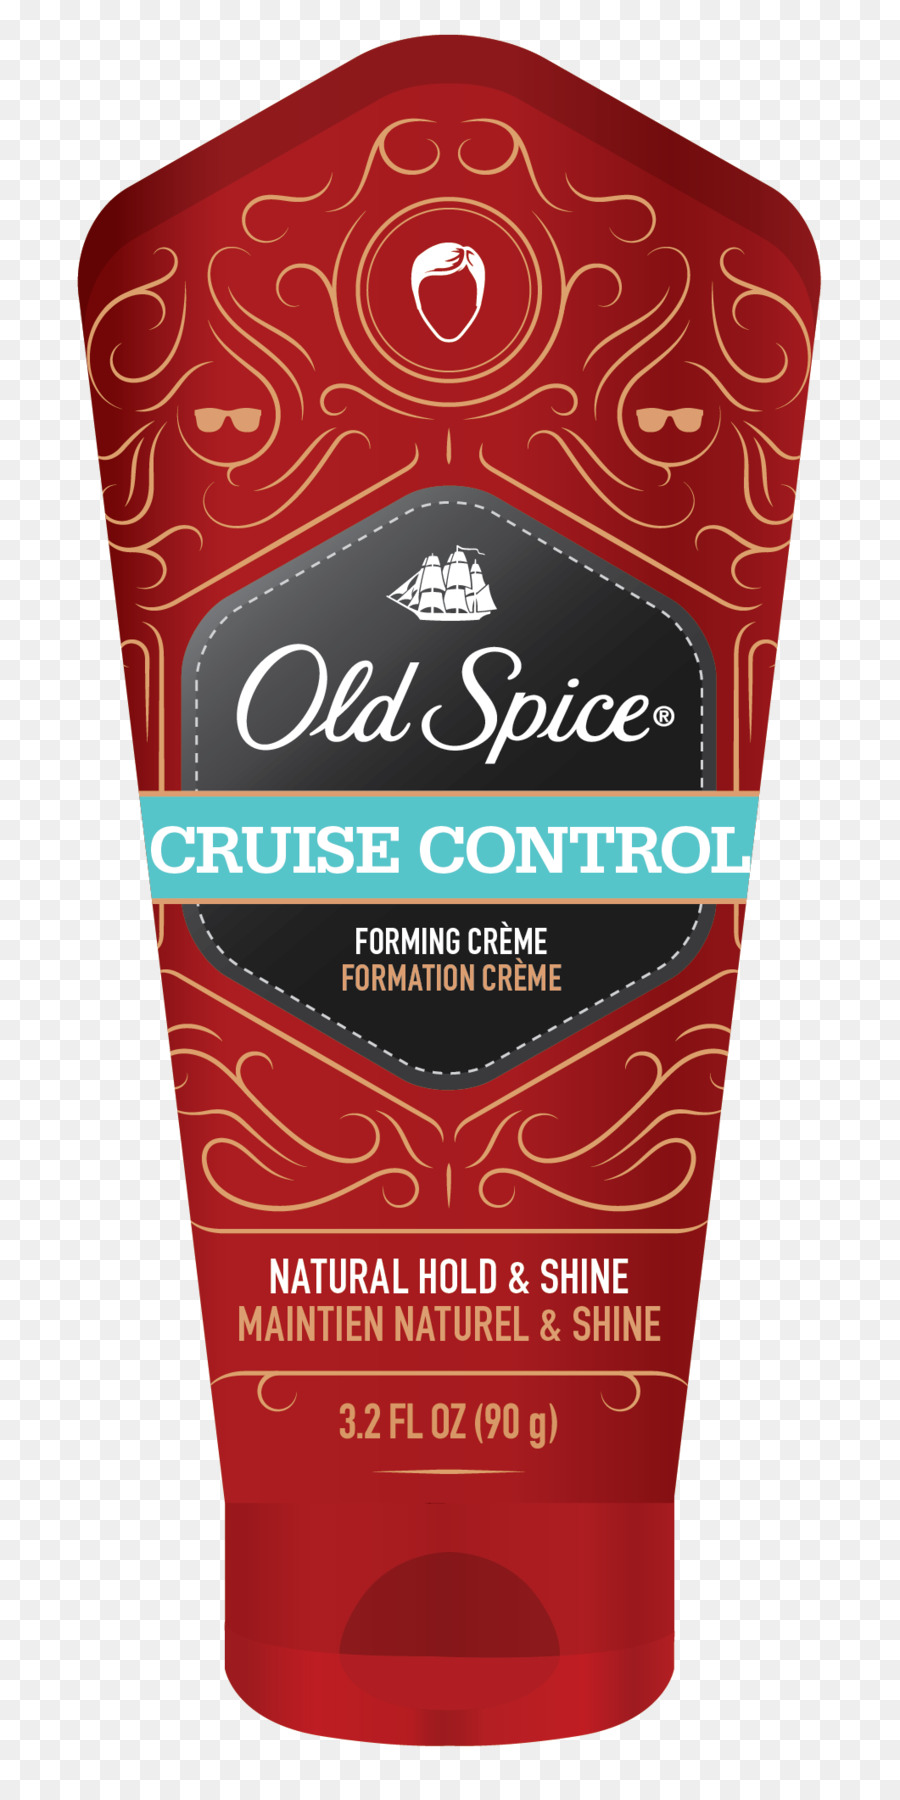 Old Spice Hair Care Procter & Gamble Old Spice Schicke Pomade - andere